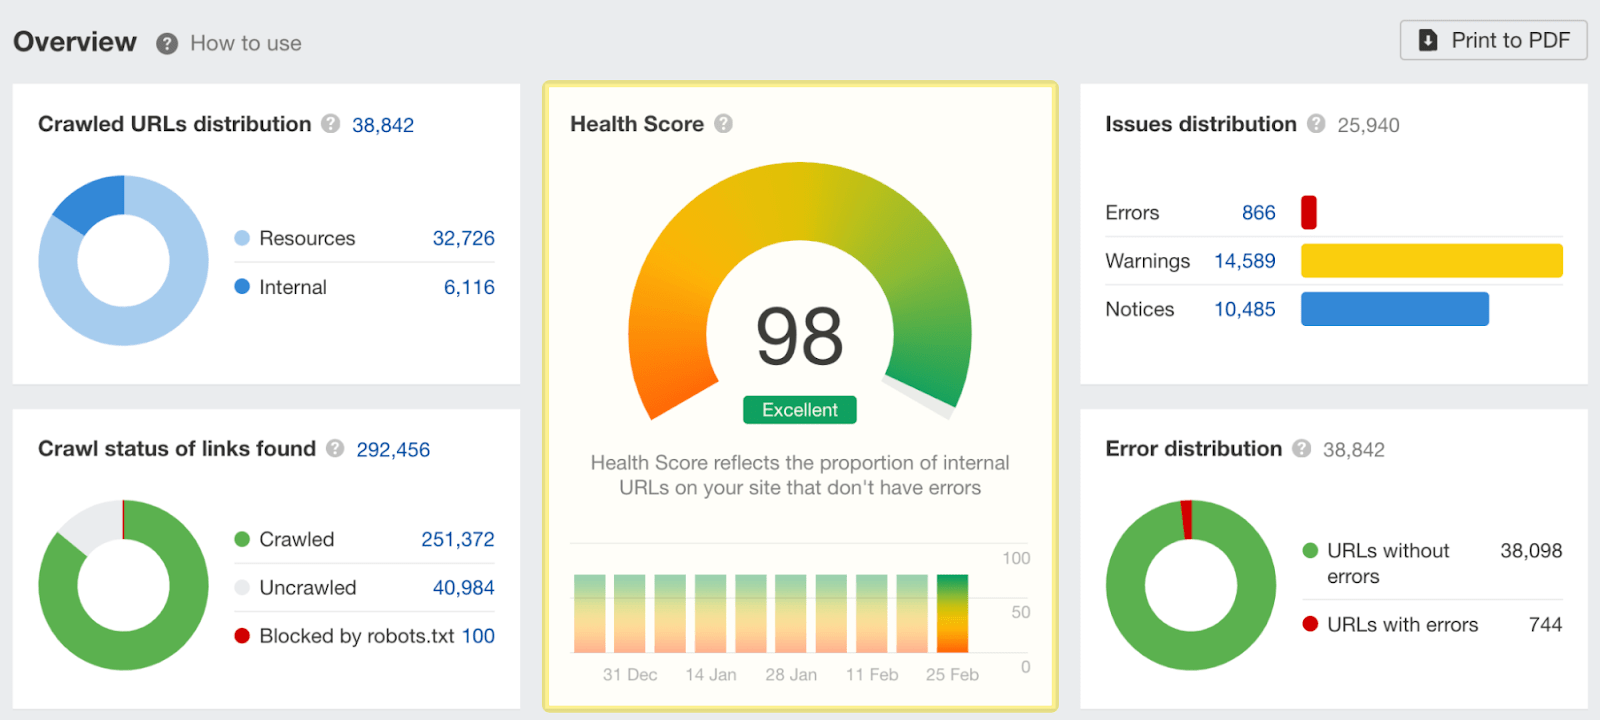 Site Audit overview showing health score of 98 